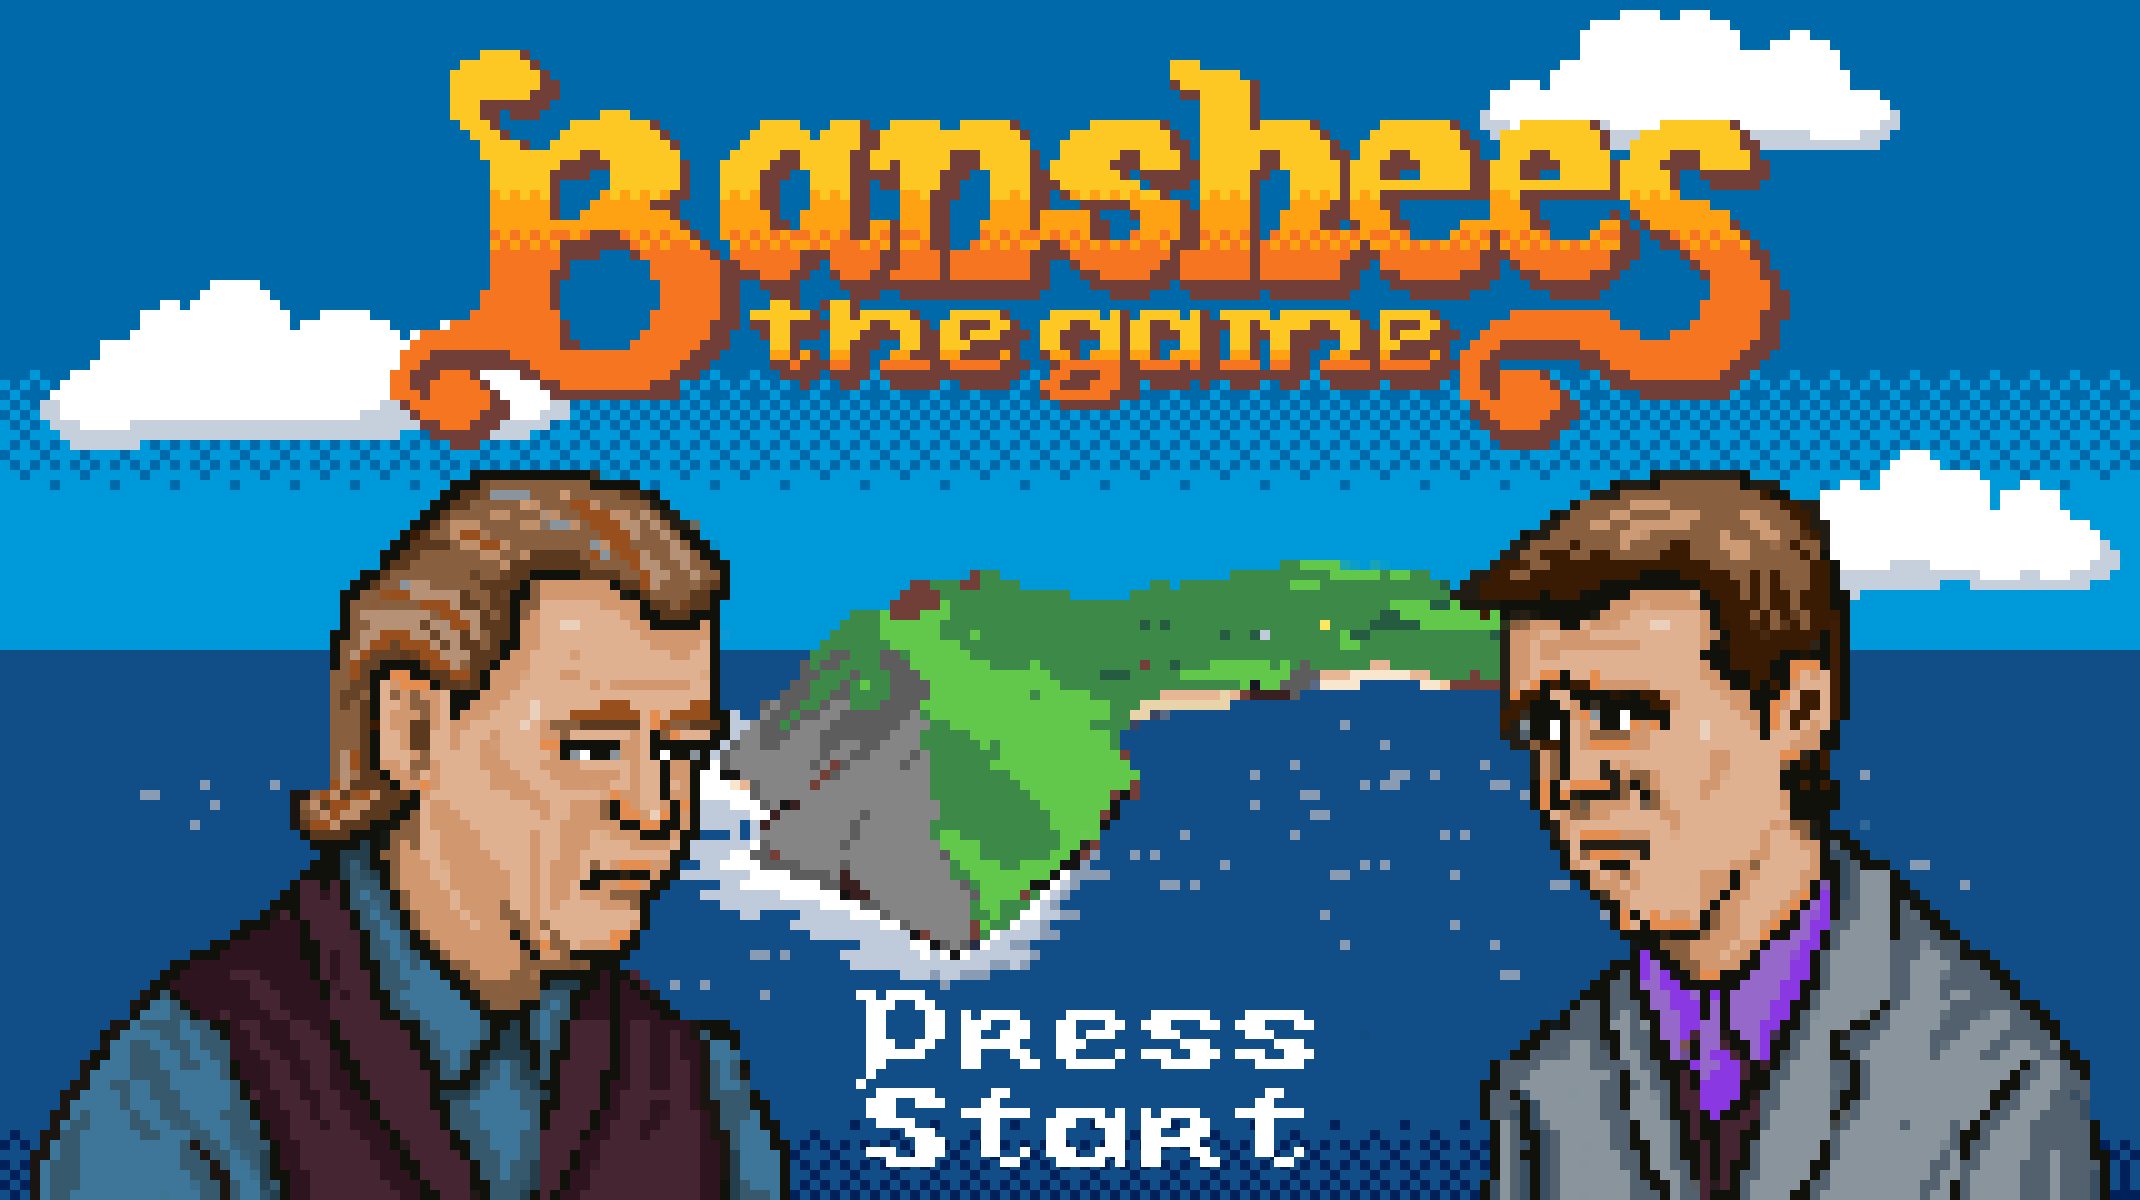 Graphic shows the title screen for the Banshees of Inisherin game, featuring the title 'Banshees the Game' and illustrations of the two main characters